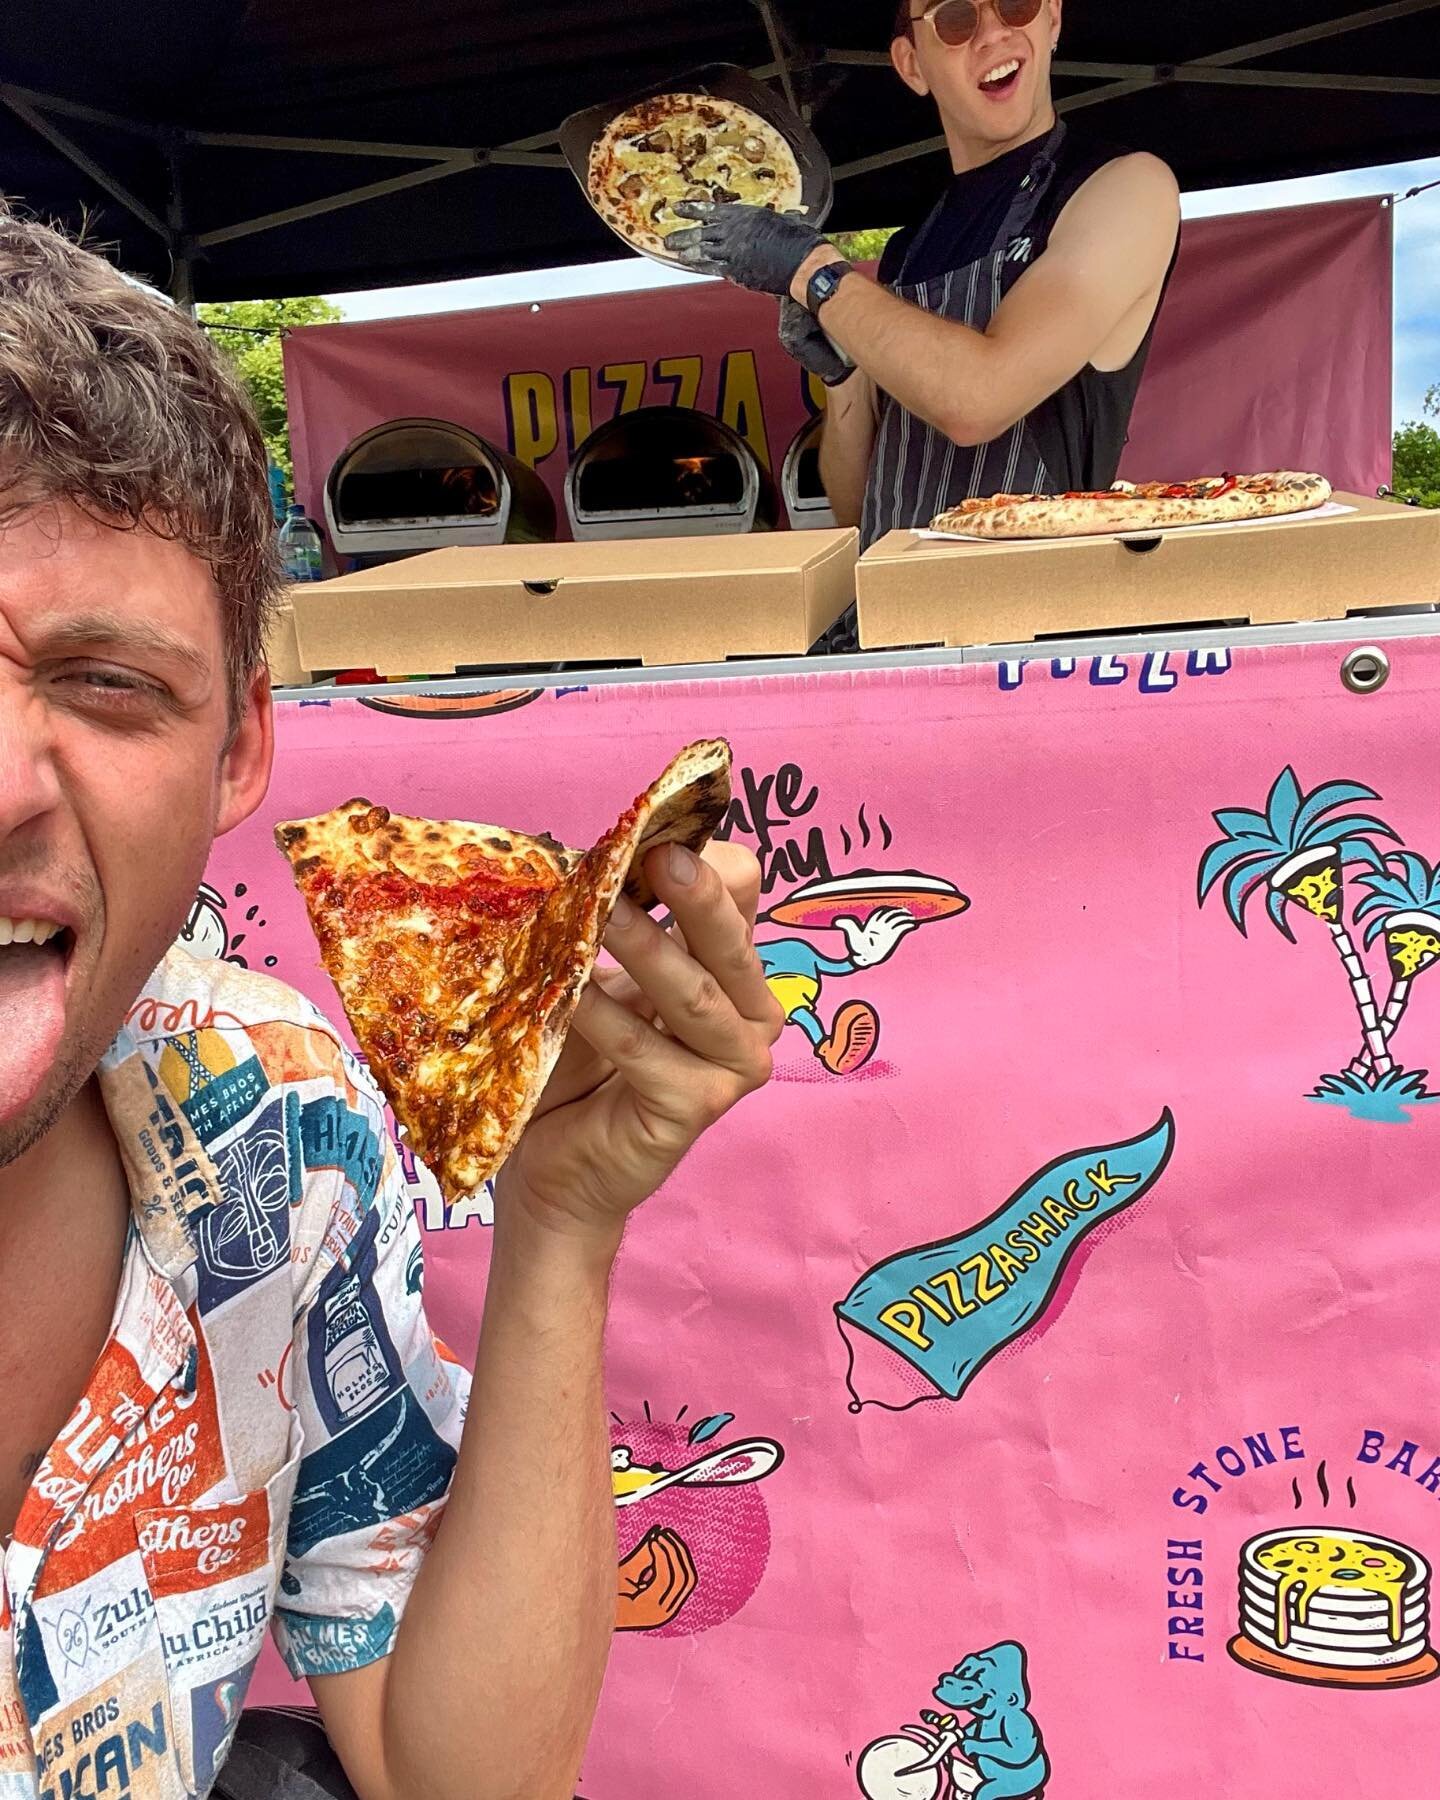 Pizza in the sun! Danny boy aka @lifesabeach94 been slinging dough since 2016! If anyone knows how to make the perfect pie every time it&rsquo;s this fella! Catch him tomorrow @greenwichmarket! He&rsquo;s generous with the cheese &amp; toppings 🤤

#